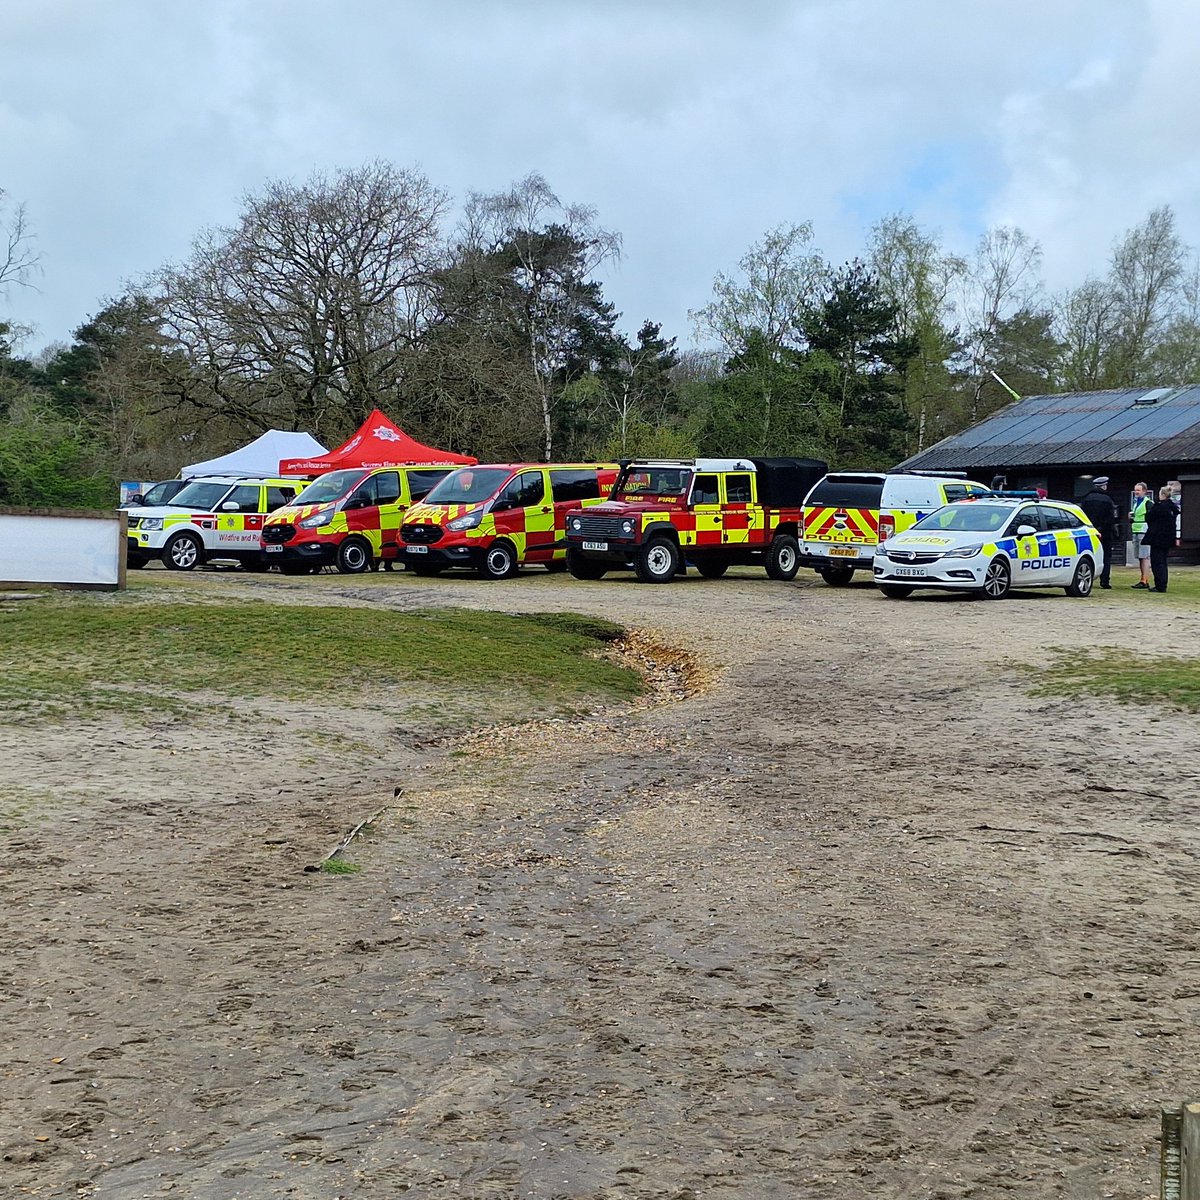 Great to meet, @SurreyFRS @SurreyPolice this morning at Frensham Pond. Very friendly team and put my daughter at ease that all service personal are friendly and aproachable.